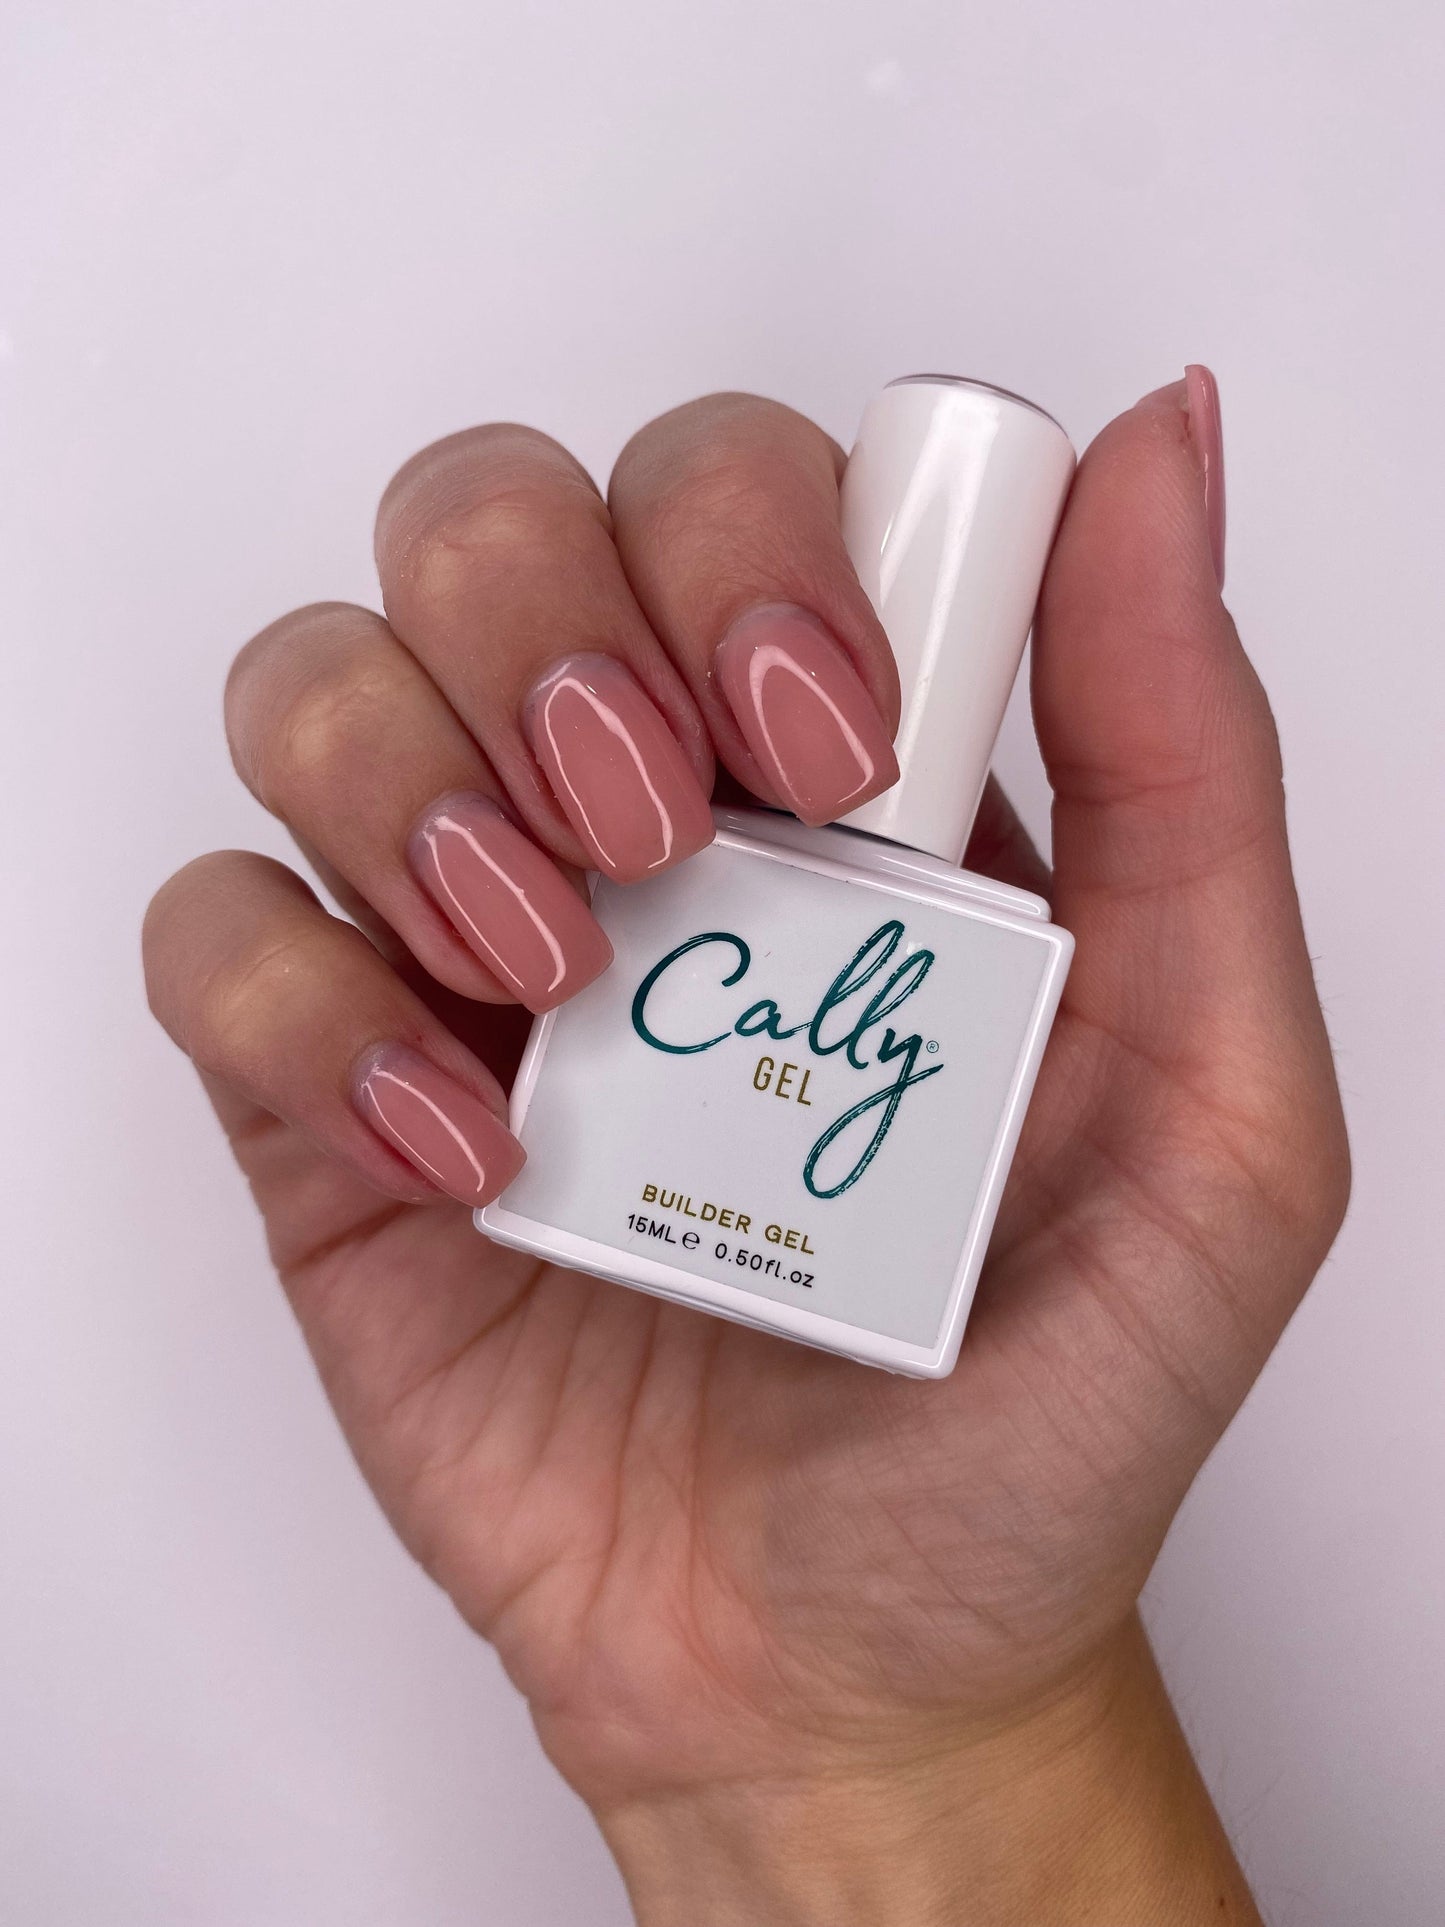 Hand Manicured with Joy Cally Builder Gel Nail Polish & 15ml Bottle in Hand